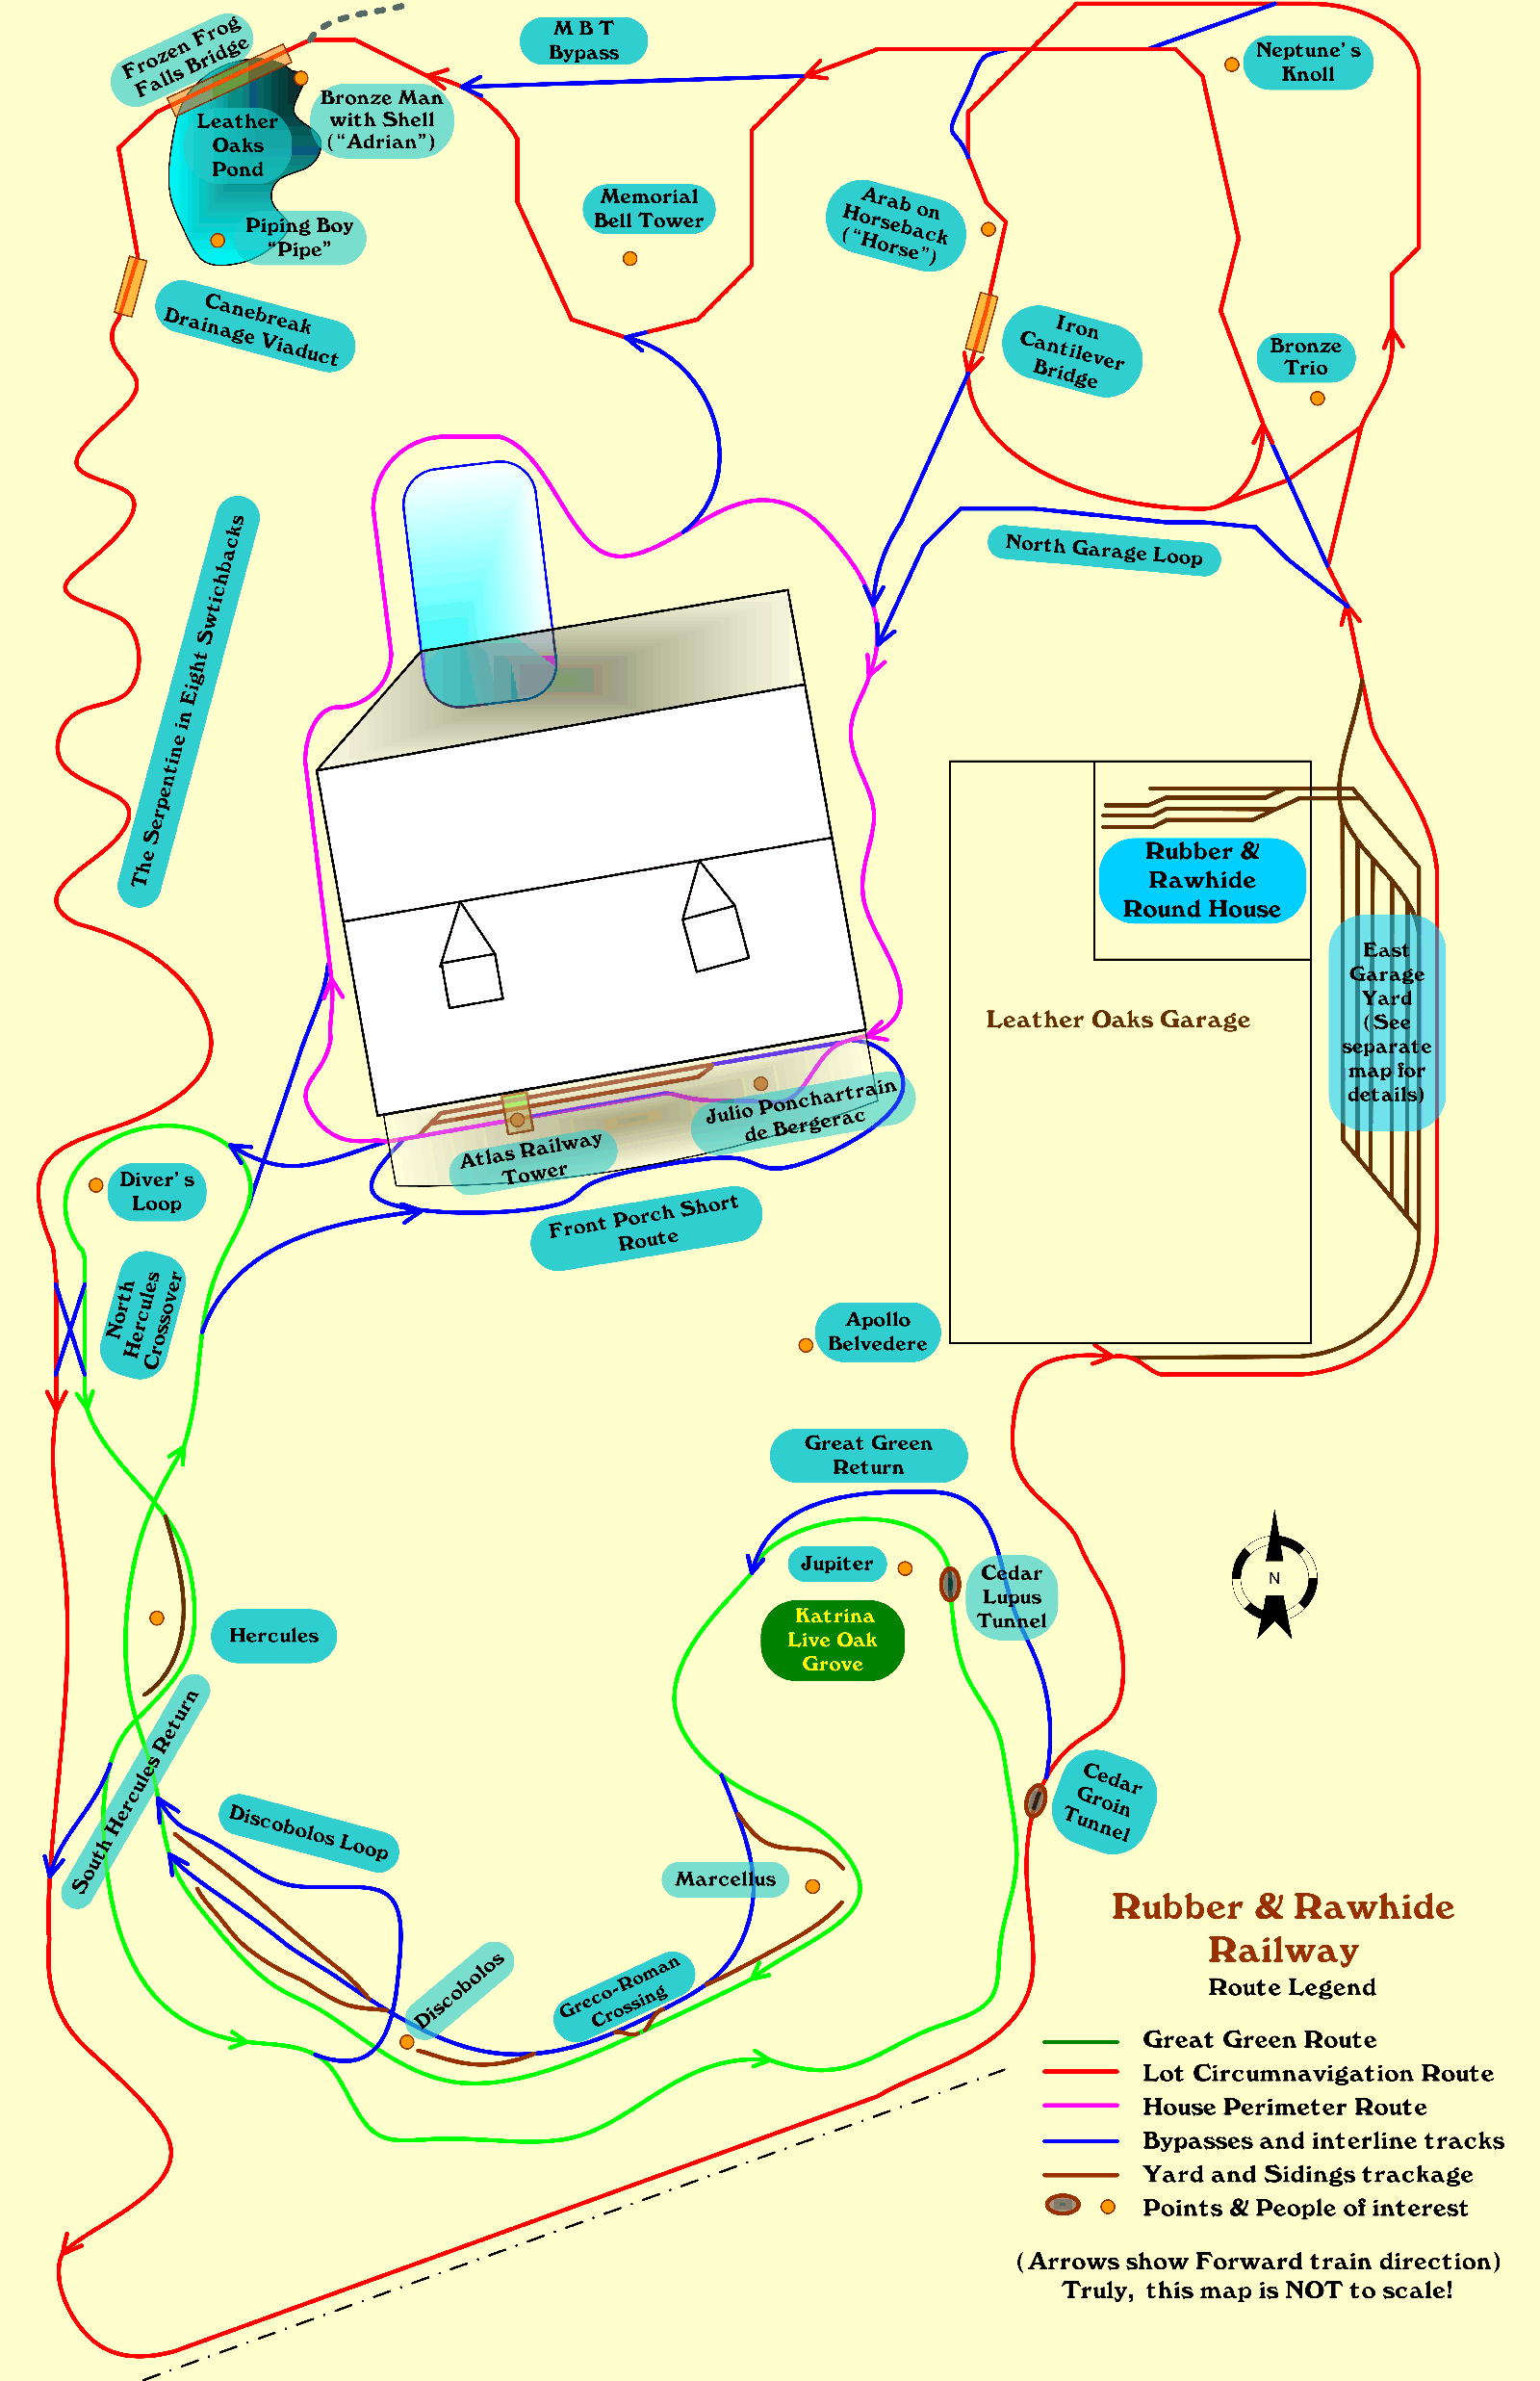 Rubber and Rawhide Railroad Track Layout